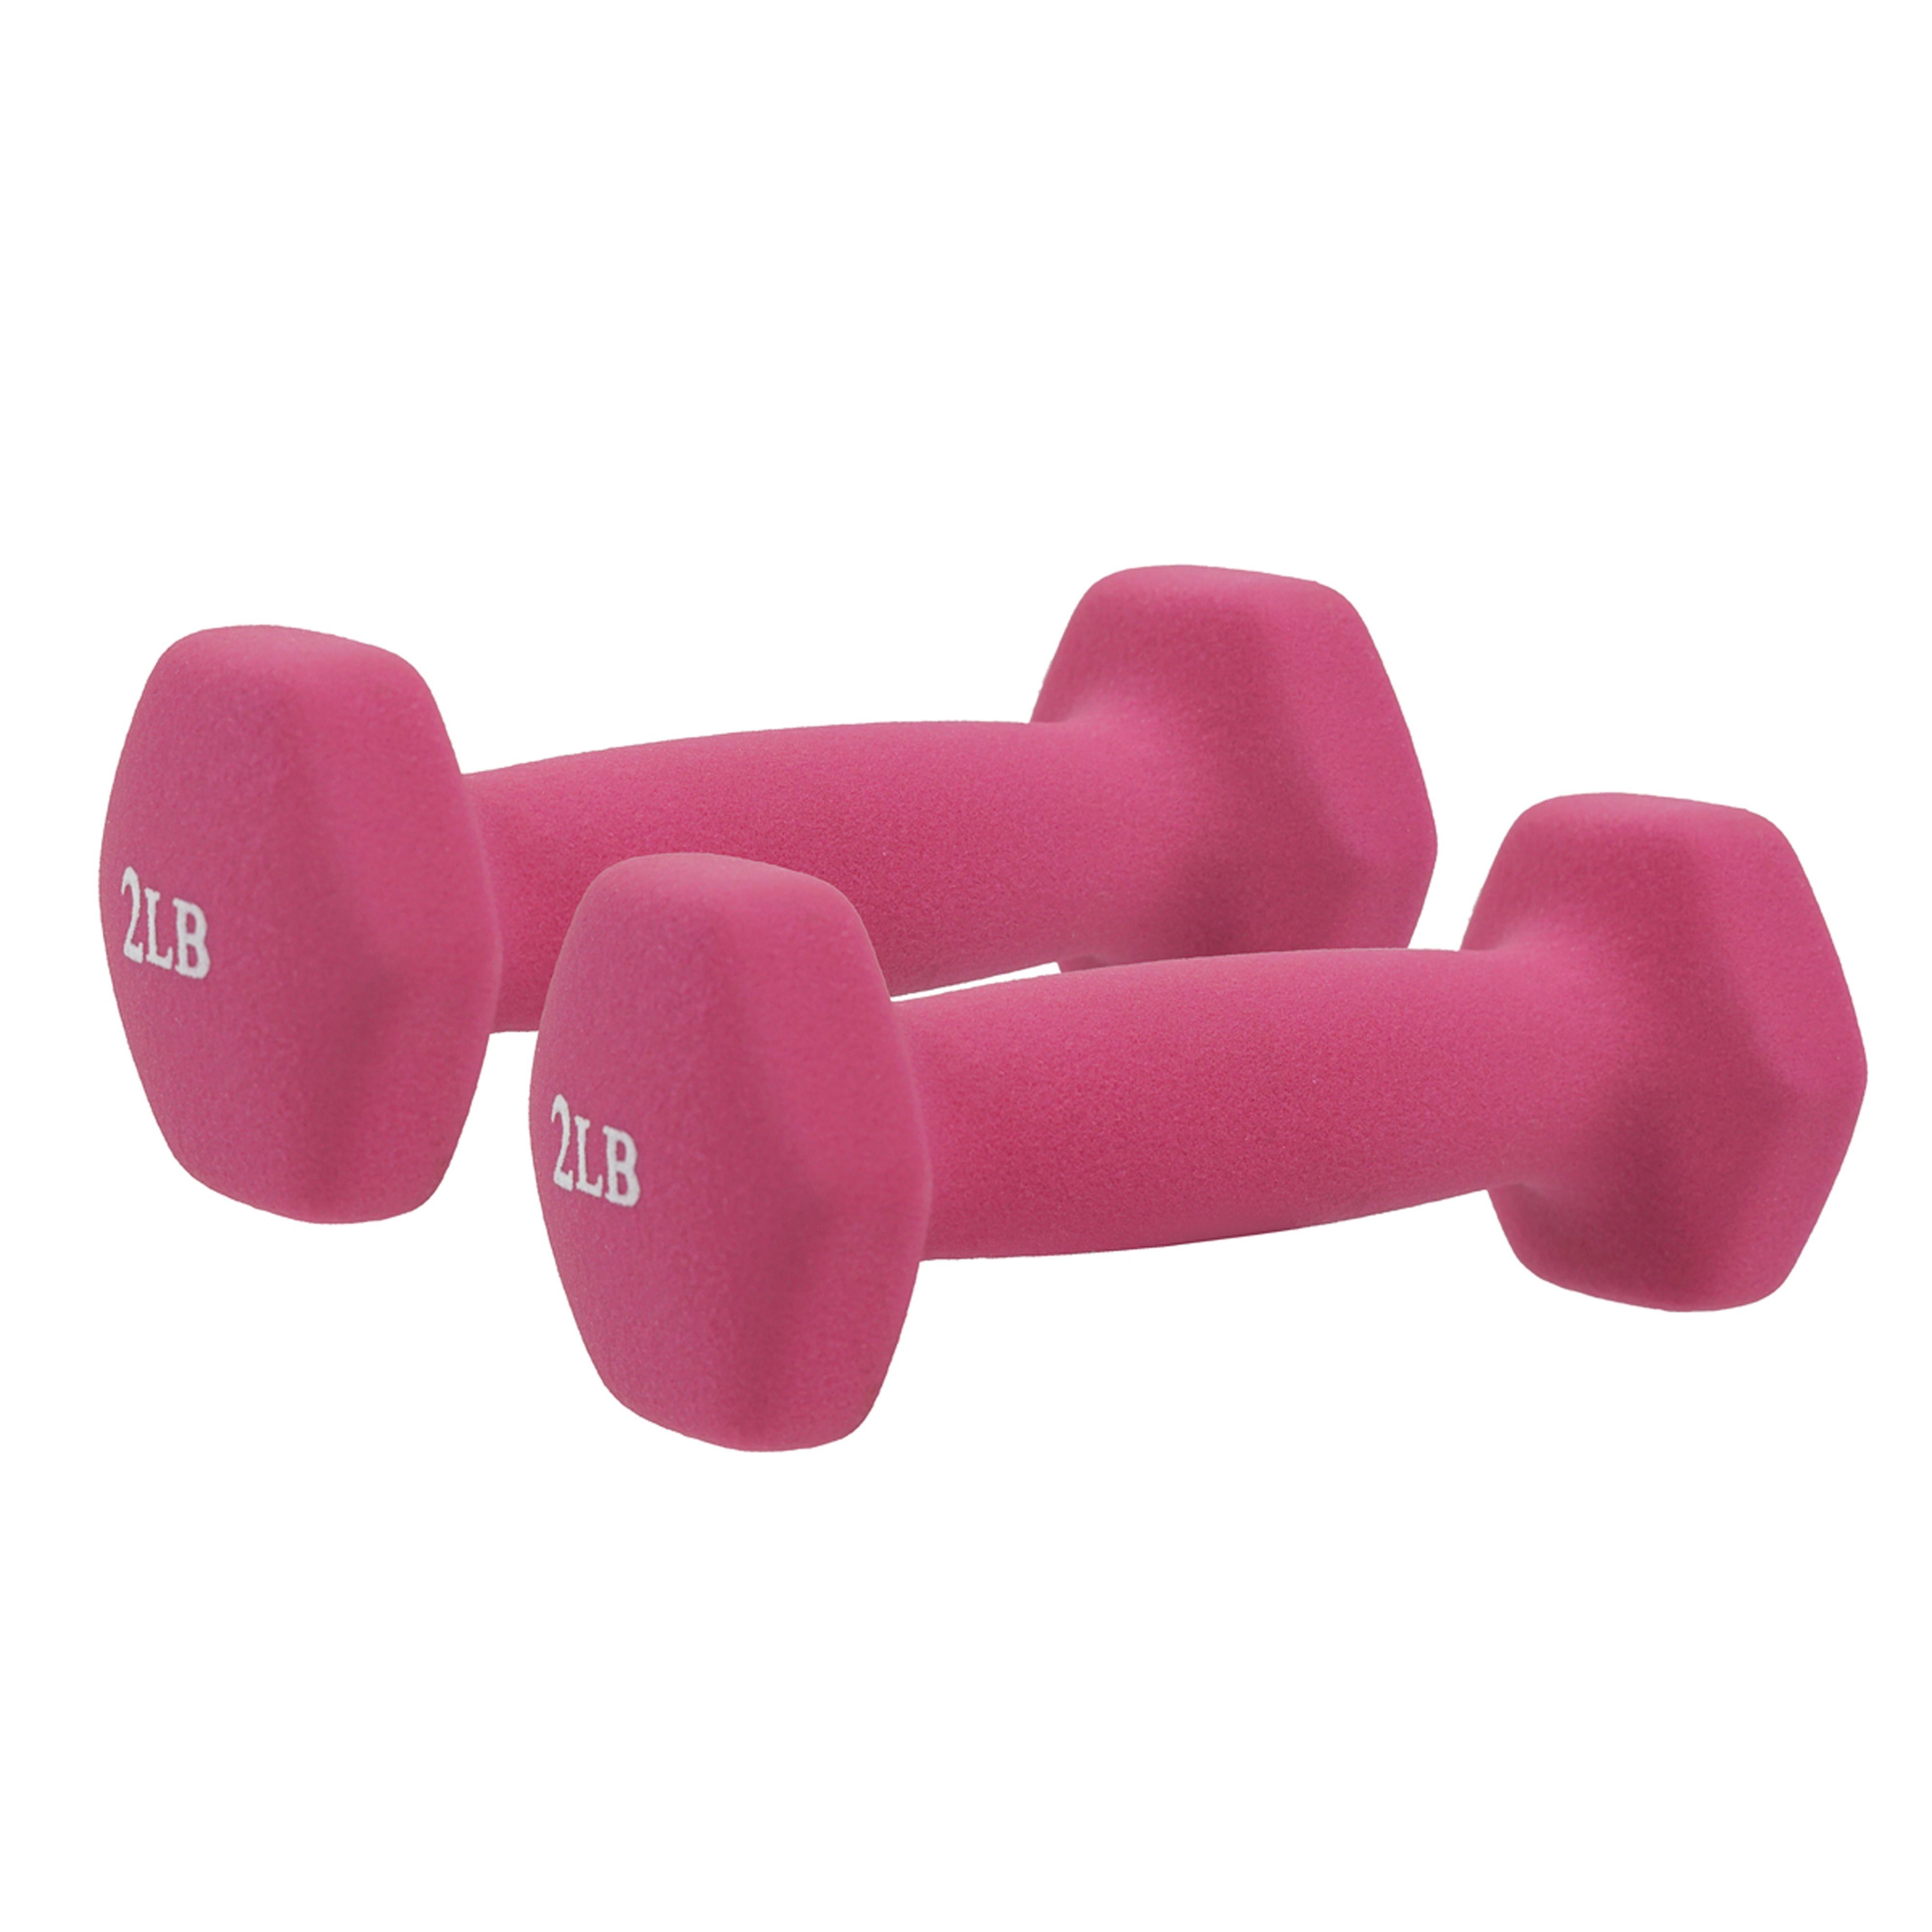 Details about   CAP Hex Neoprene 2 lb Pound Set of Two Dumbbell Weights FREE SAME DAY SHIP!!! 